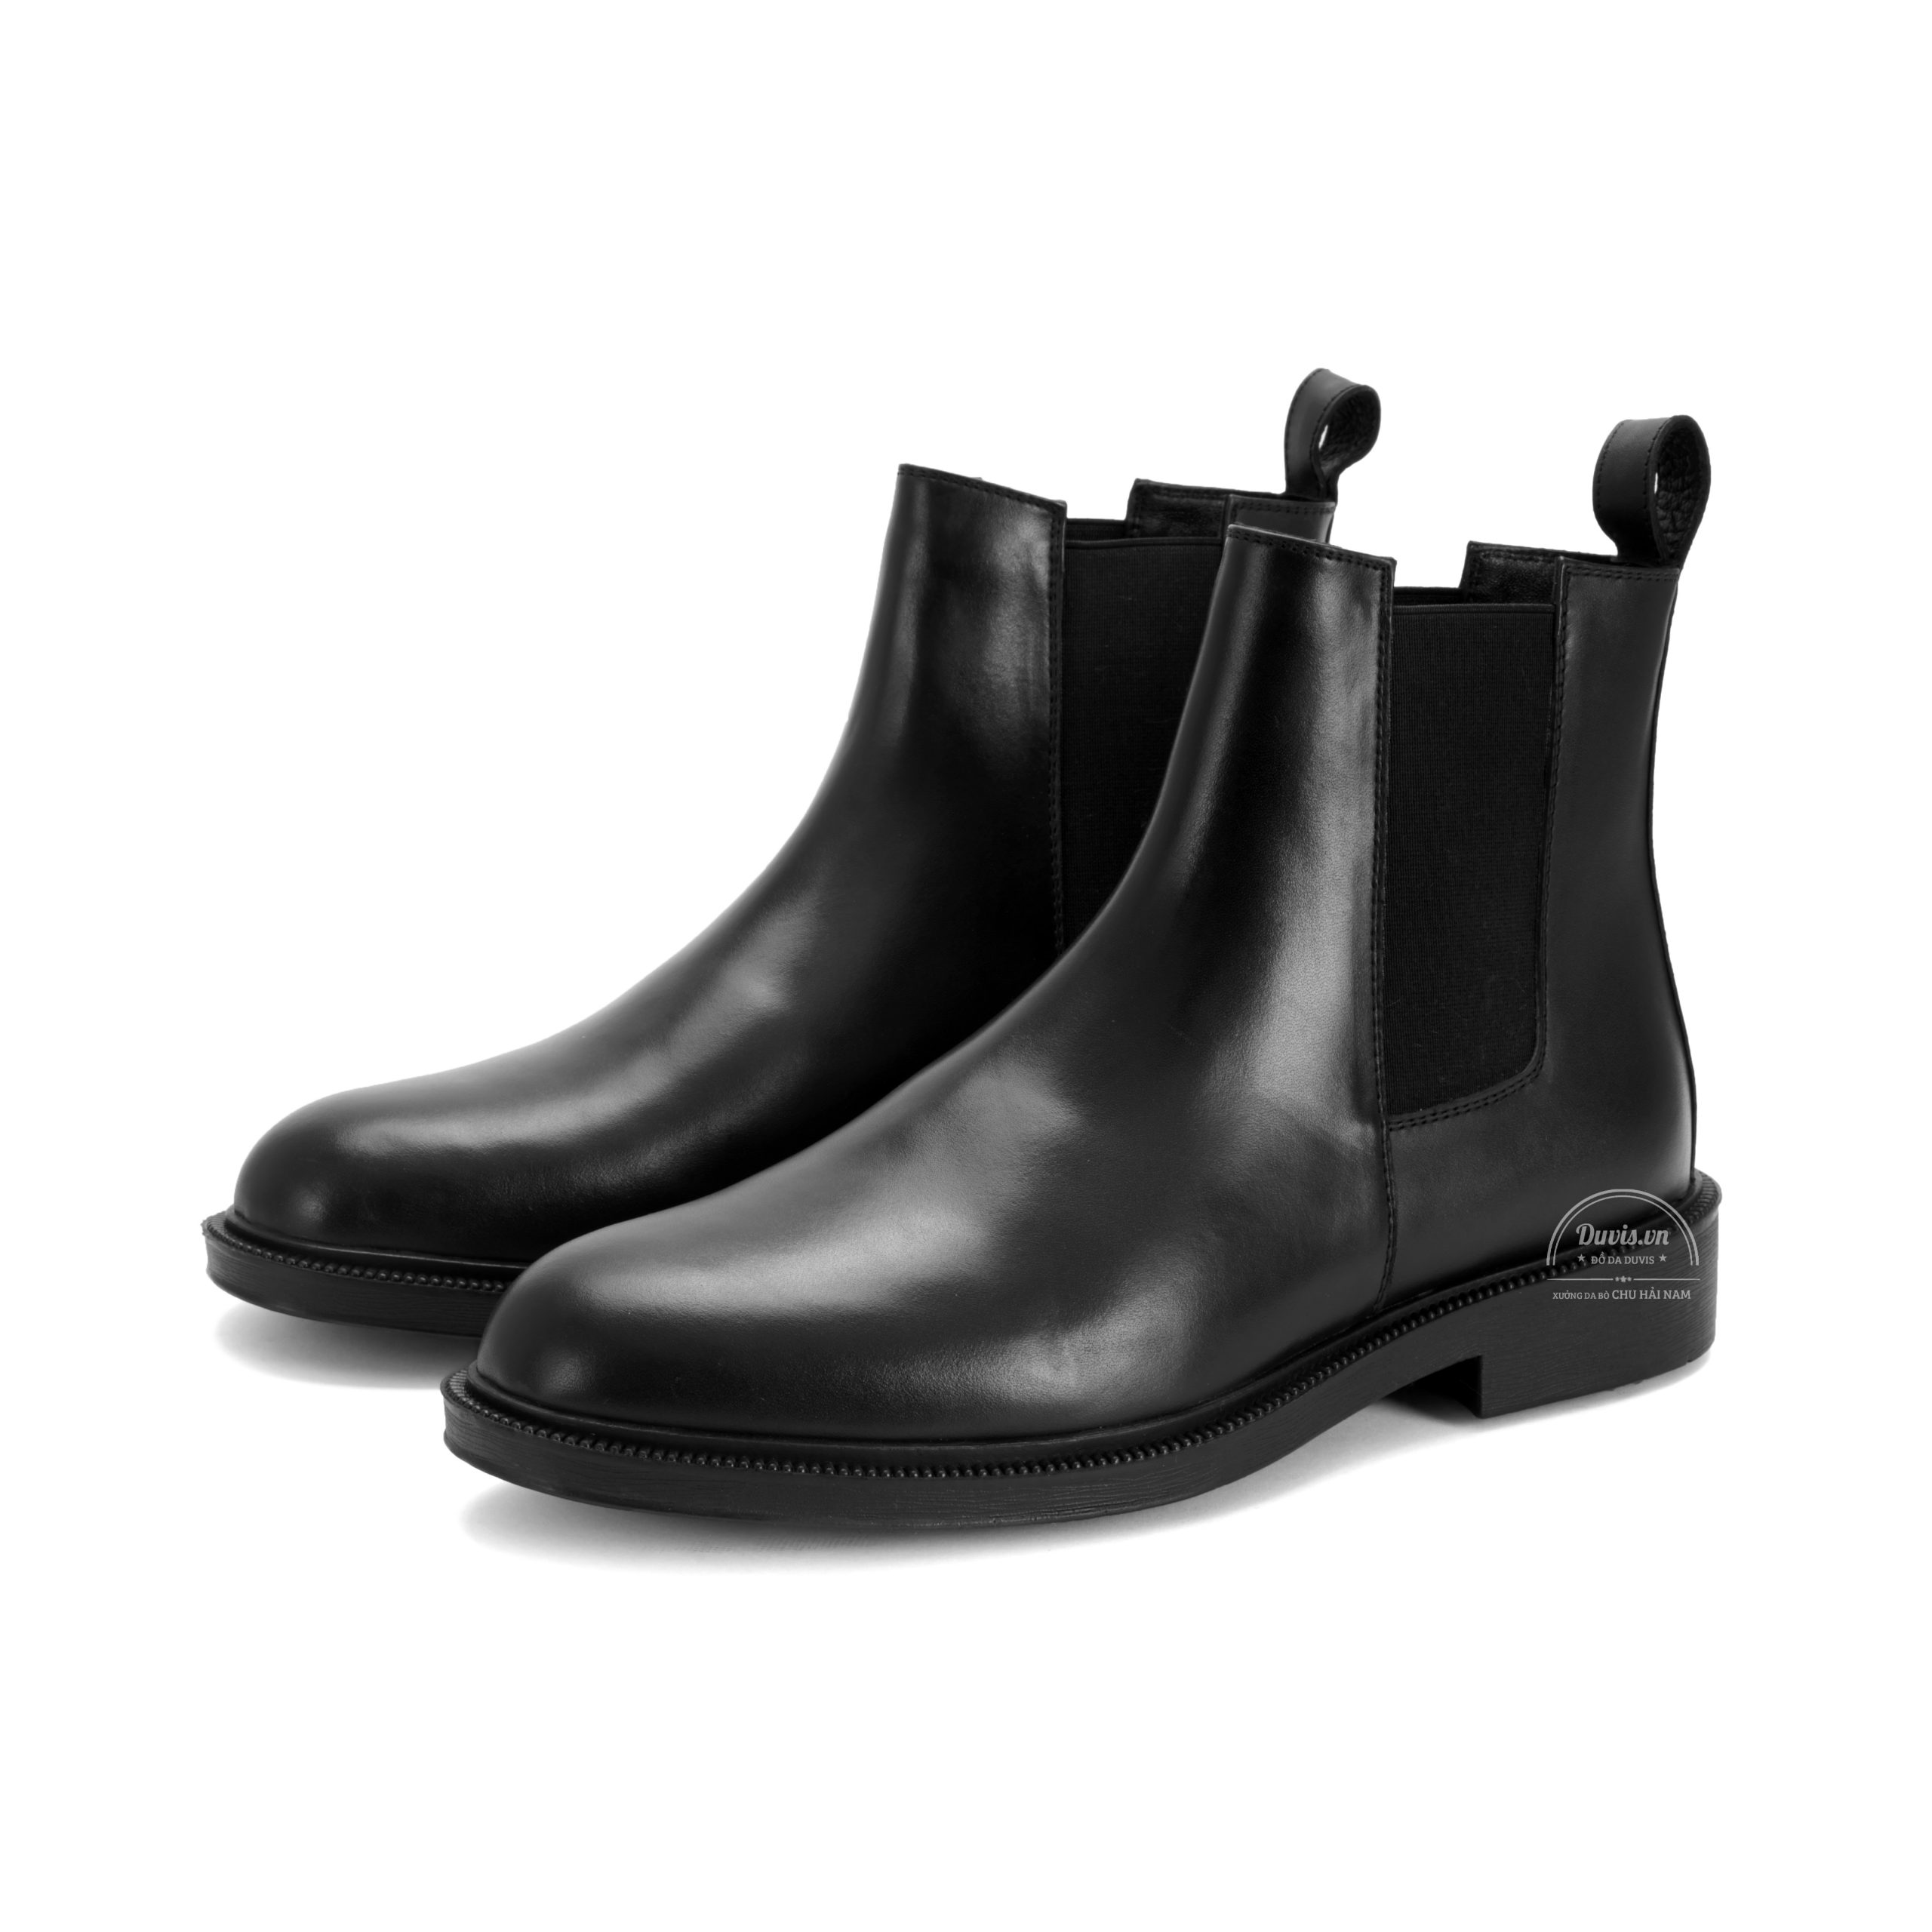 Chelseaboot02 - Giày Chelsea Boots